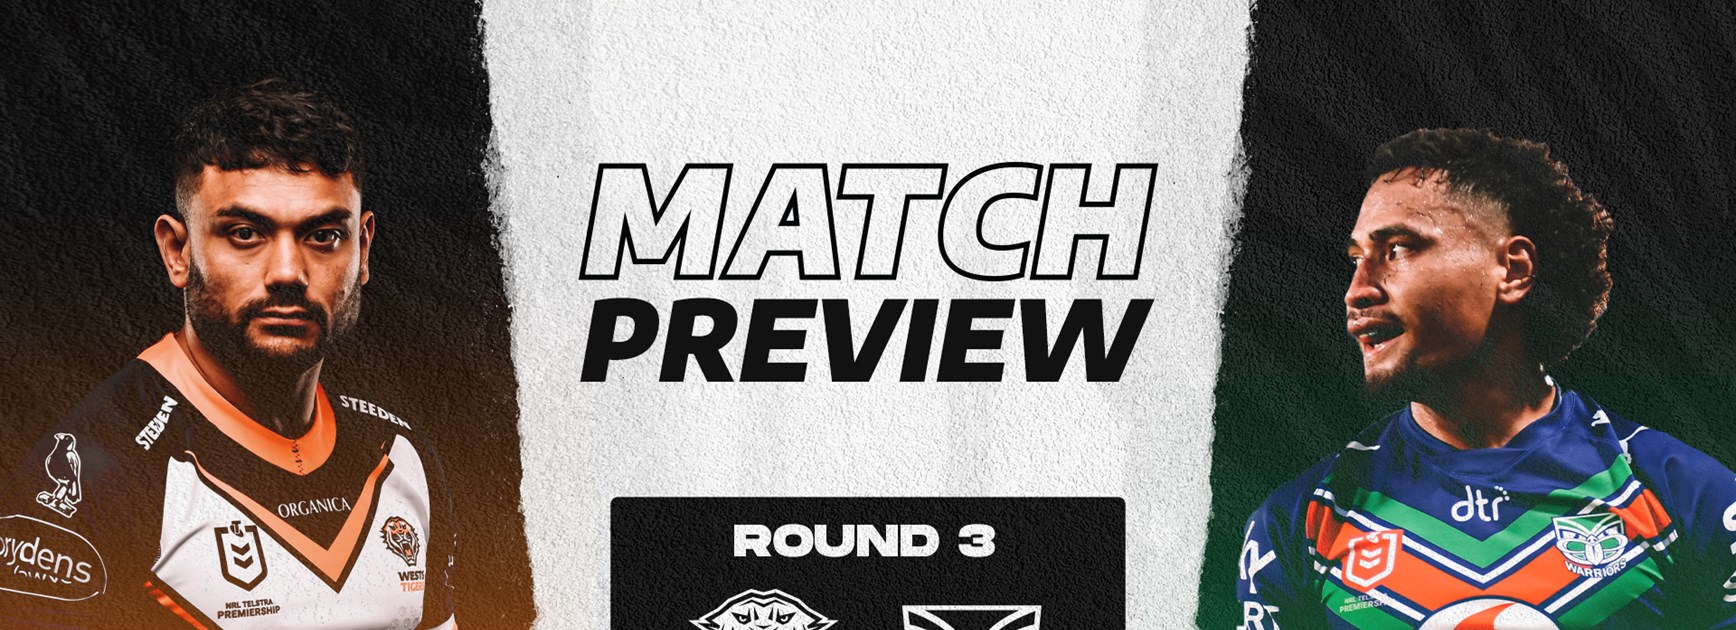 Match Preview: Wests Tigers vs Warriors